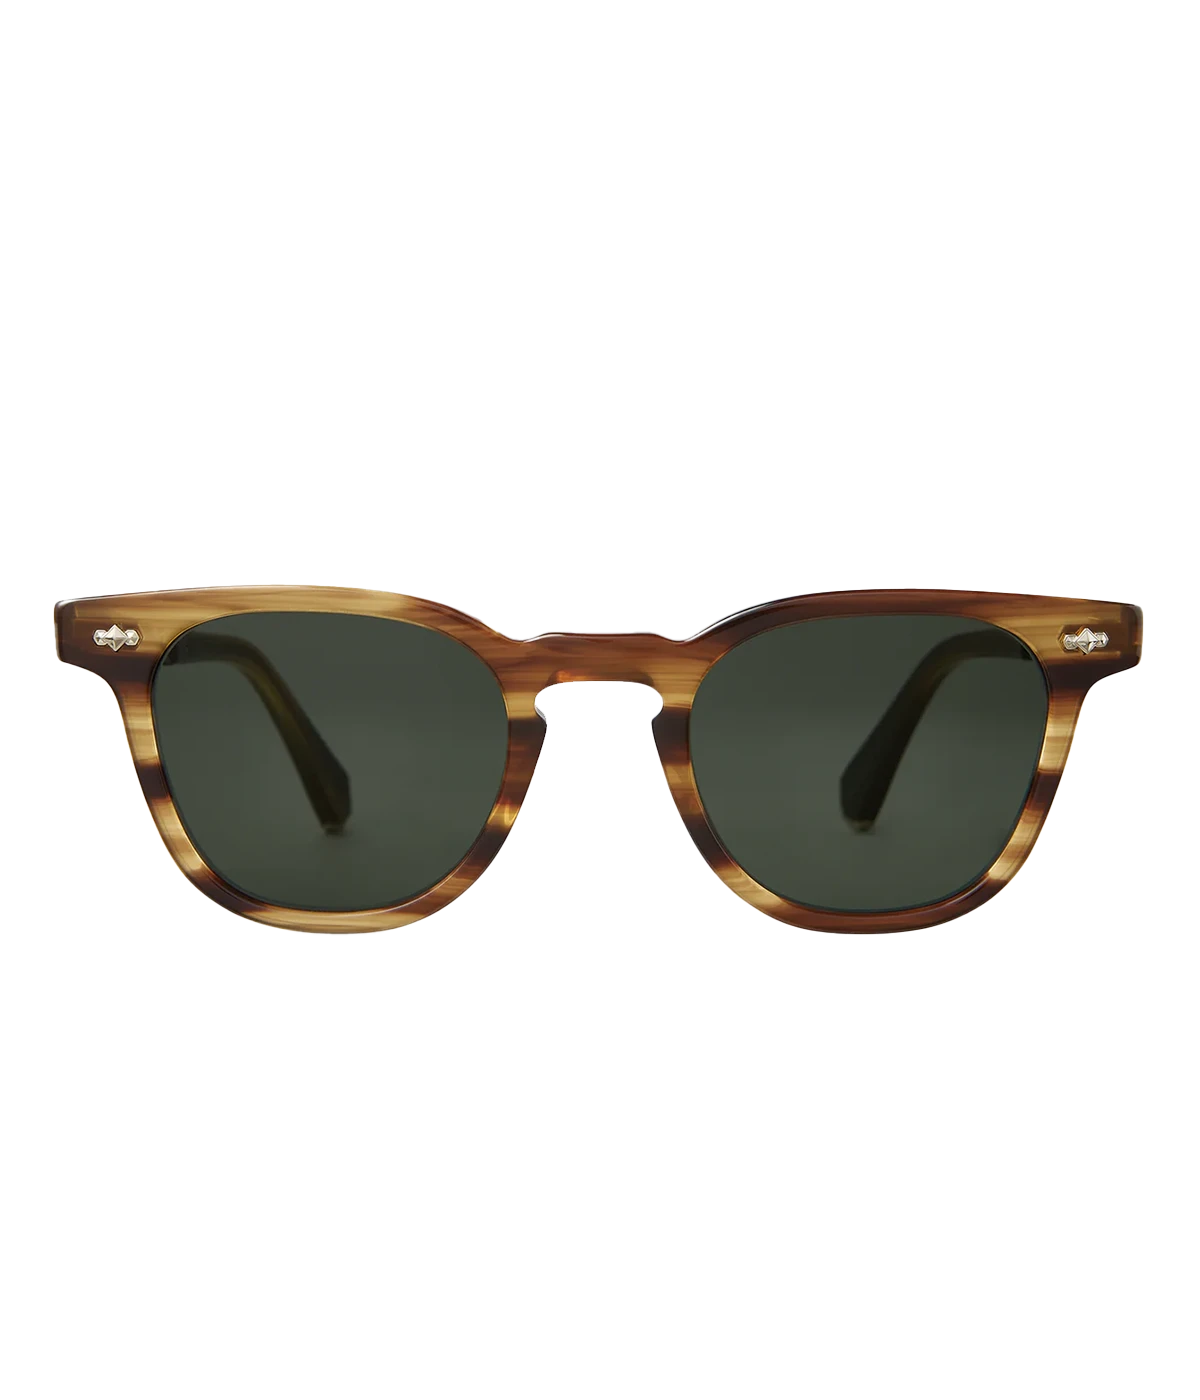 Wayfarer style brown sunglasses by Mr LEight. Highest quality, handcrafted in Japan.